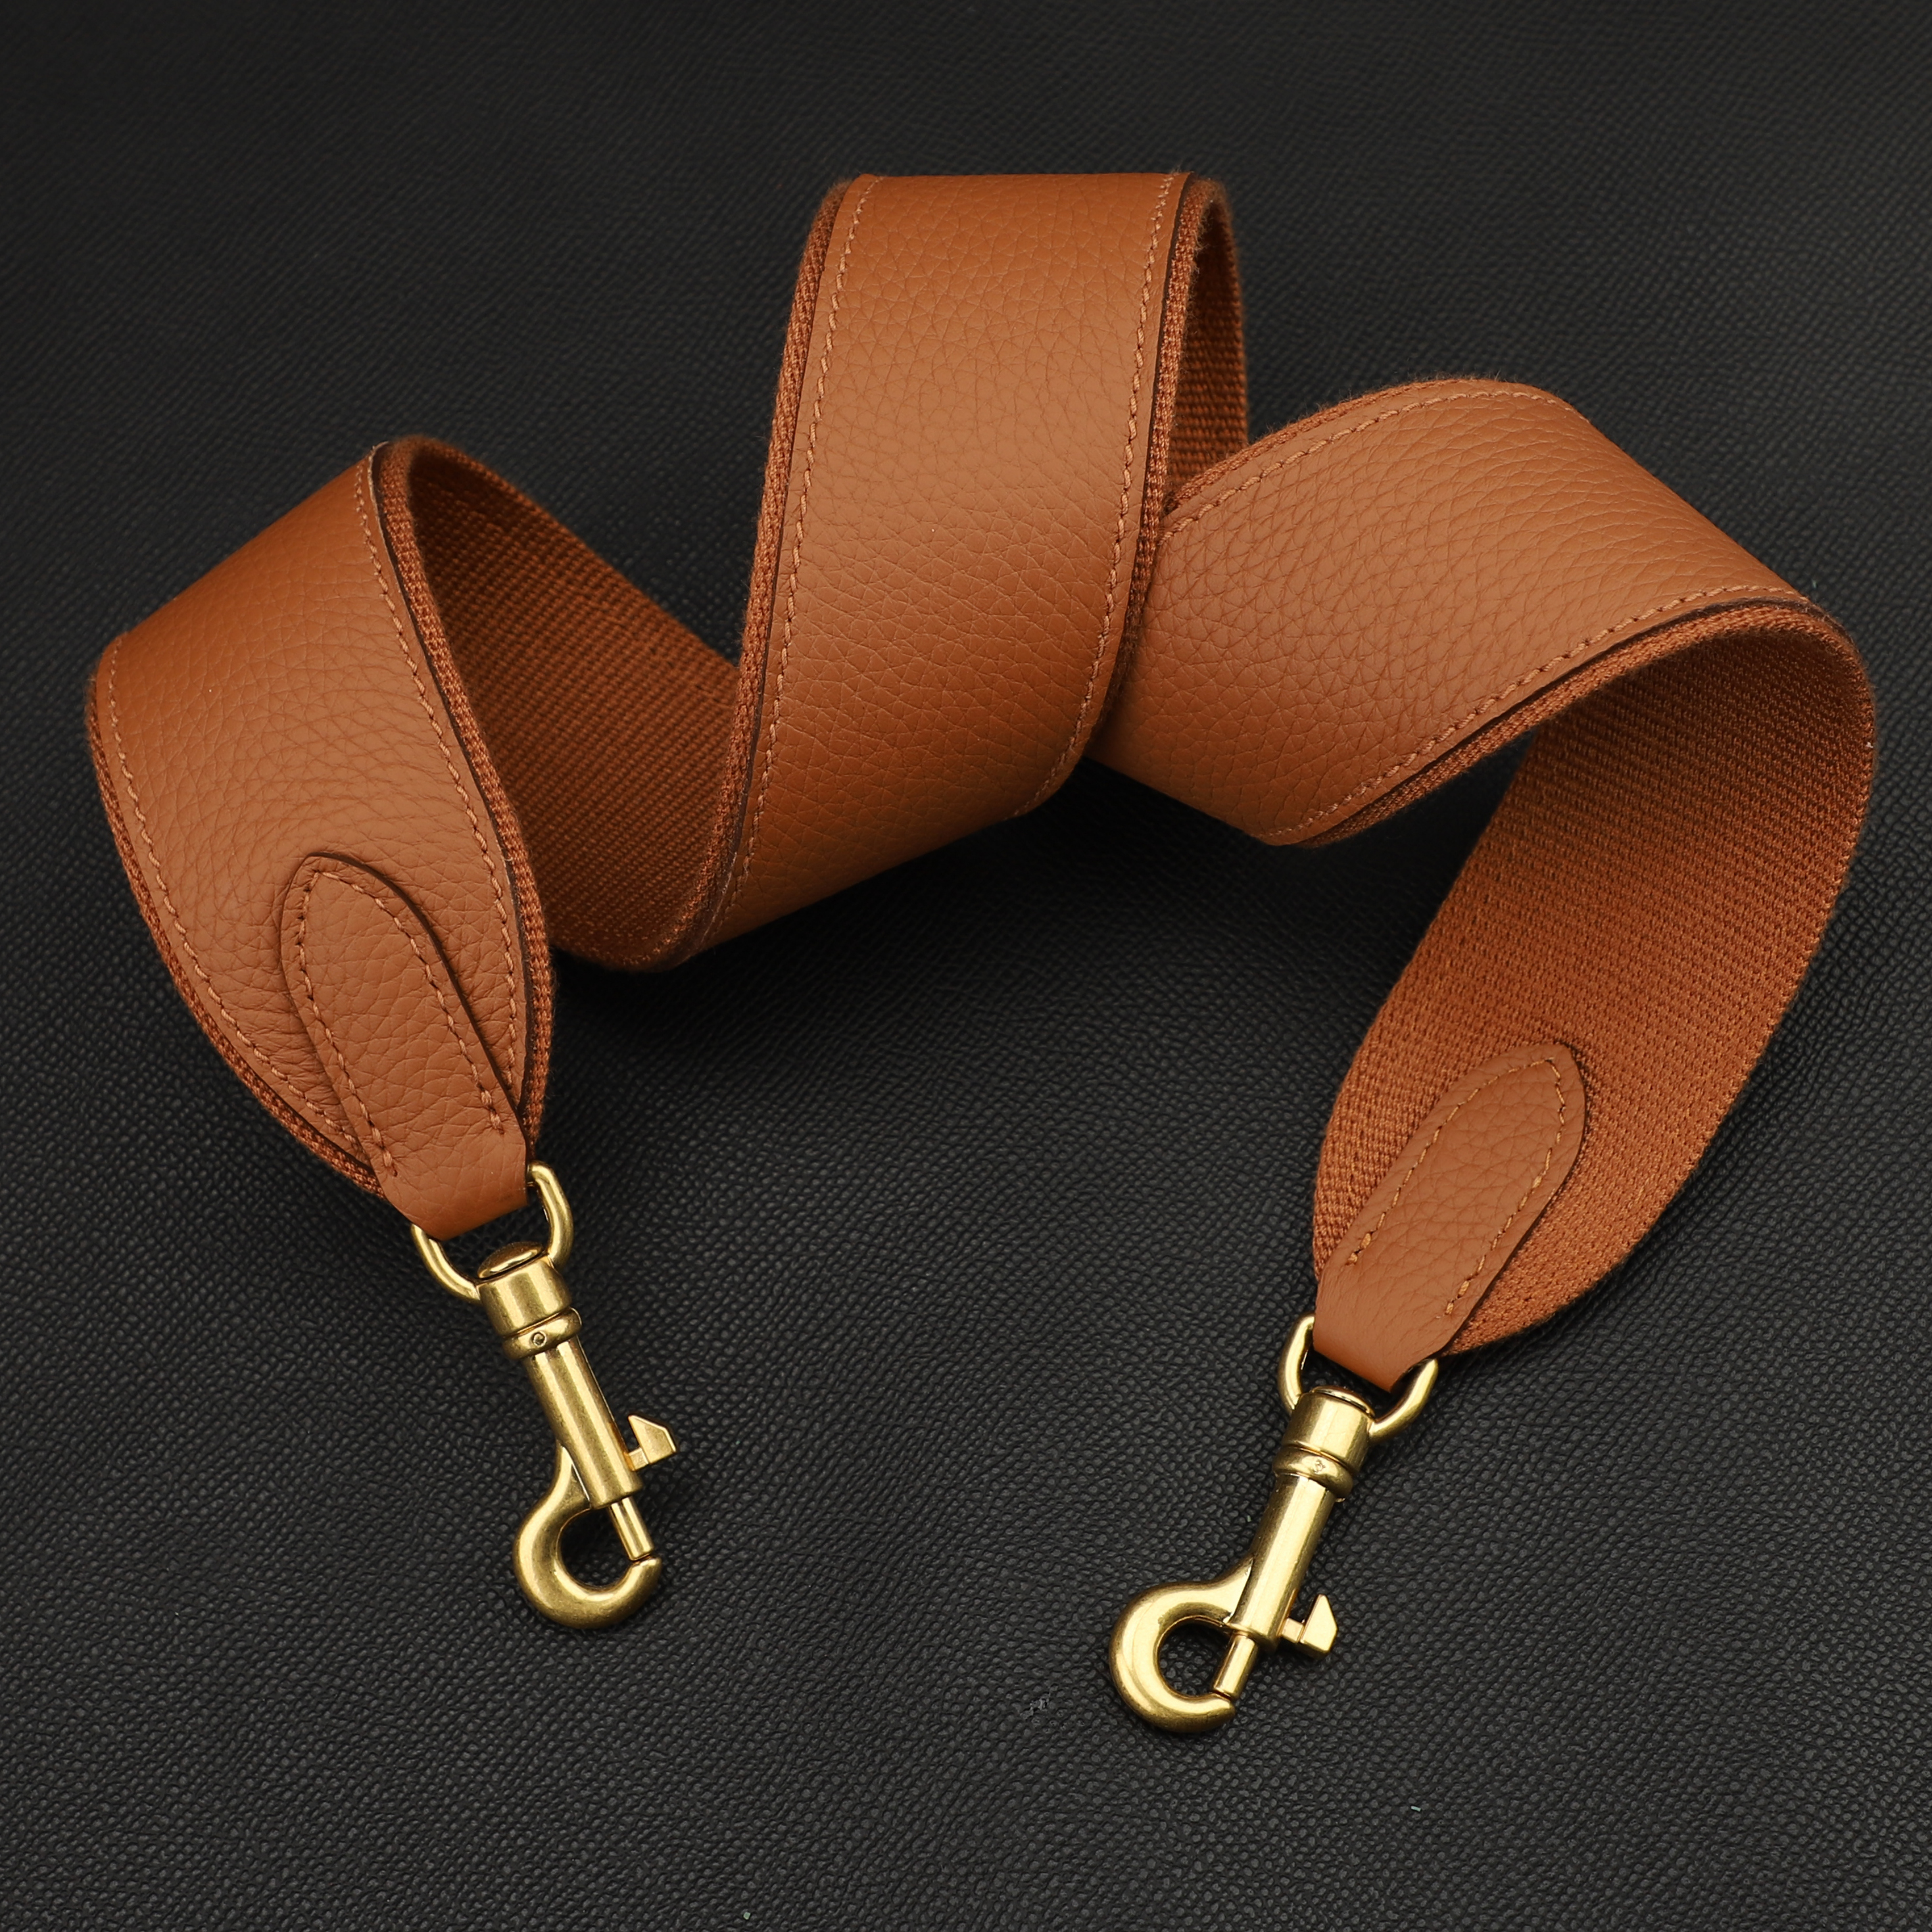 5cm Width - Hermes Canvas Strap - Chain Replacement for Hermes Bag